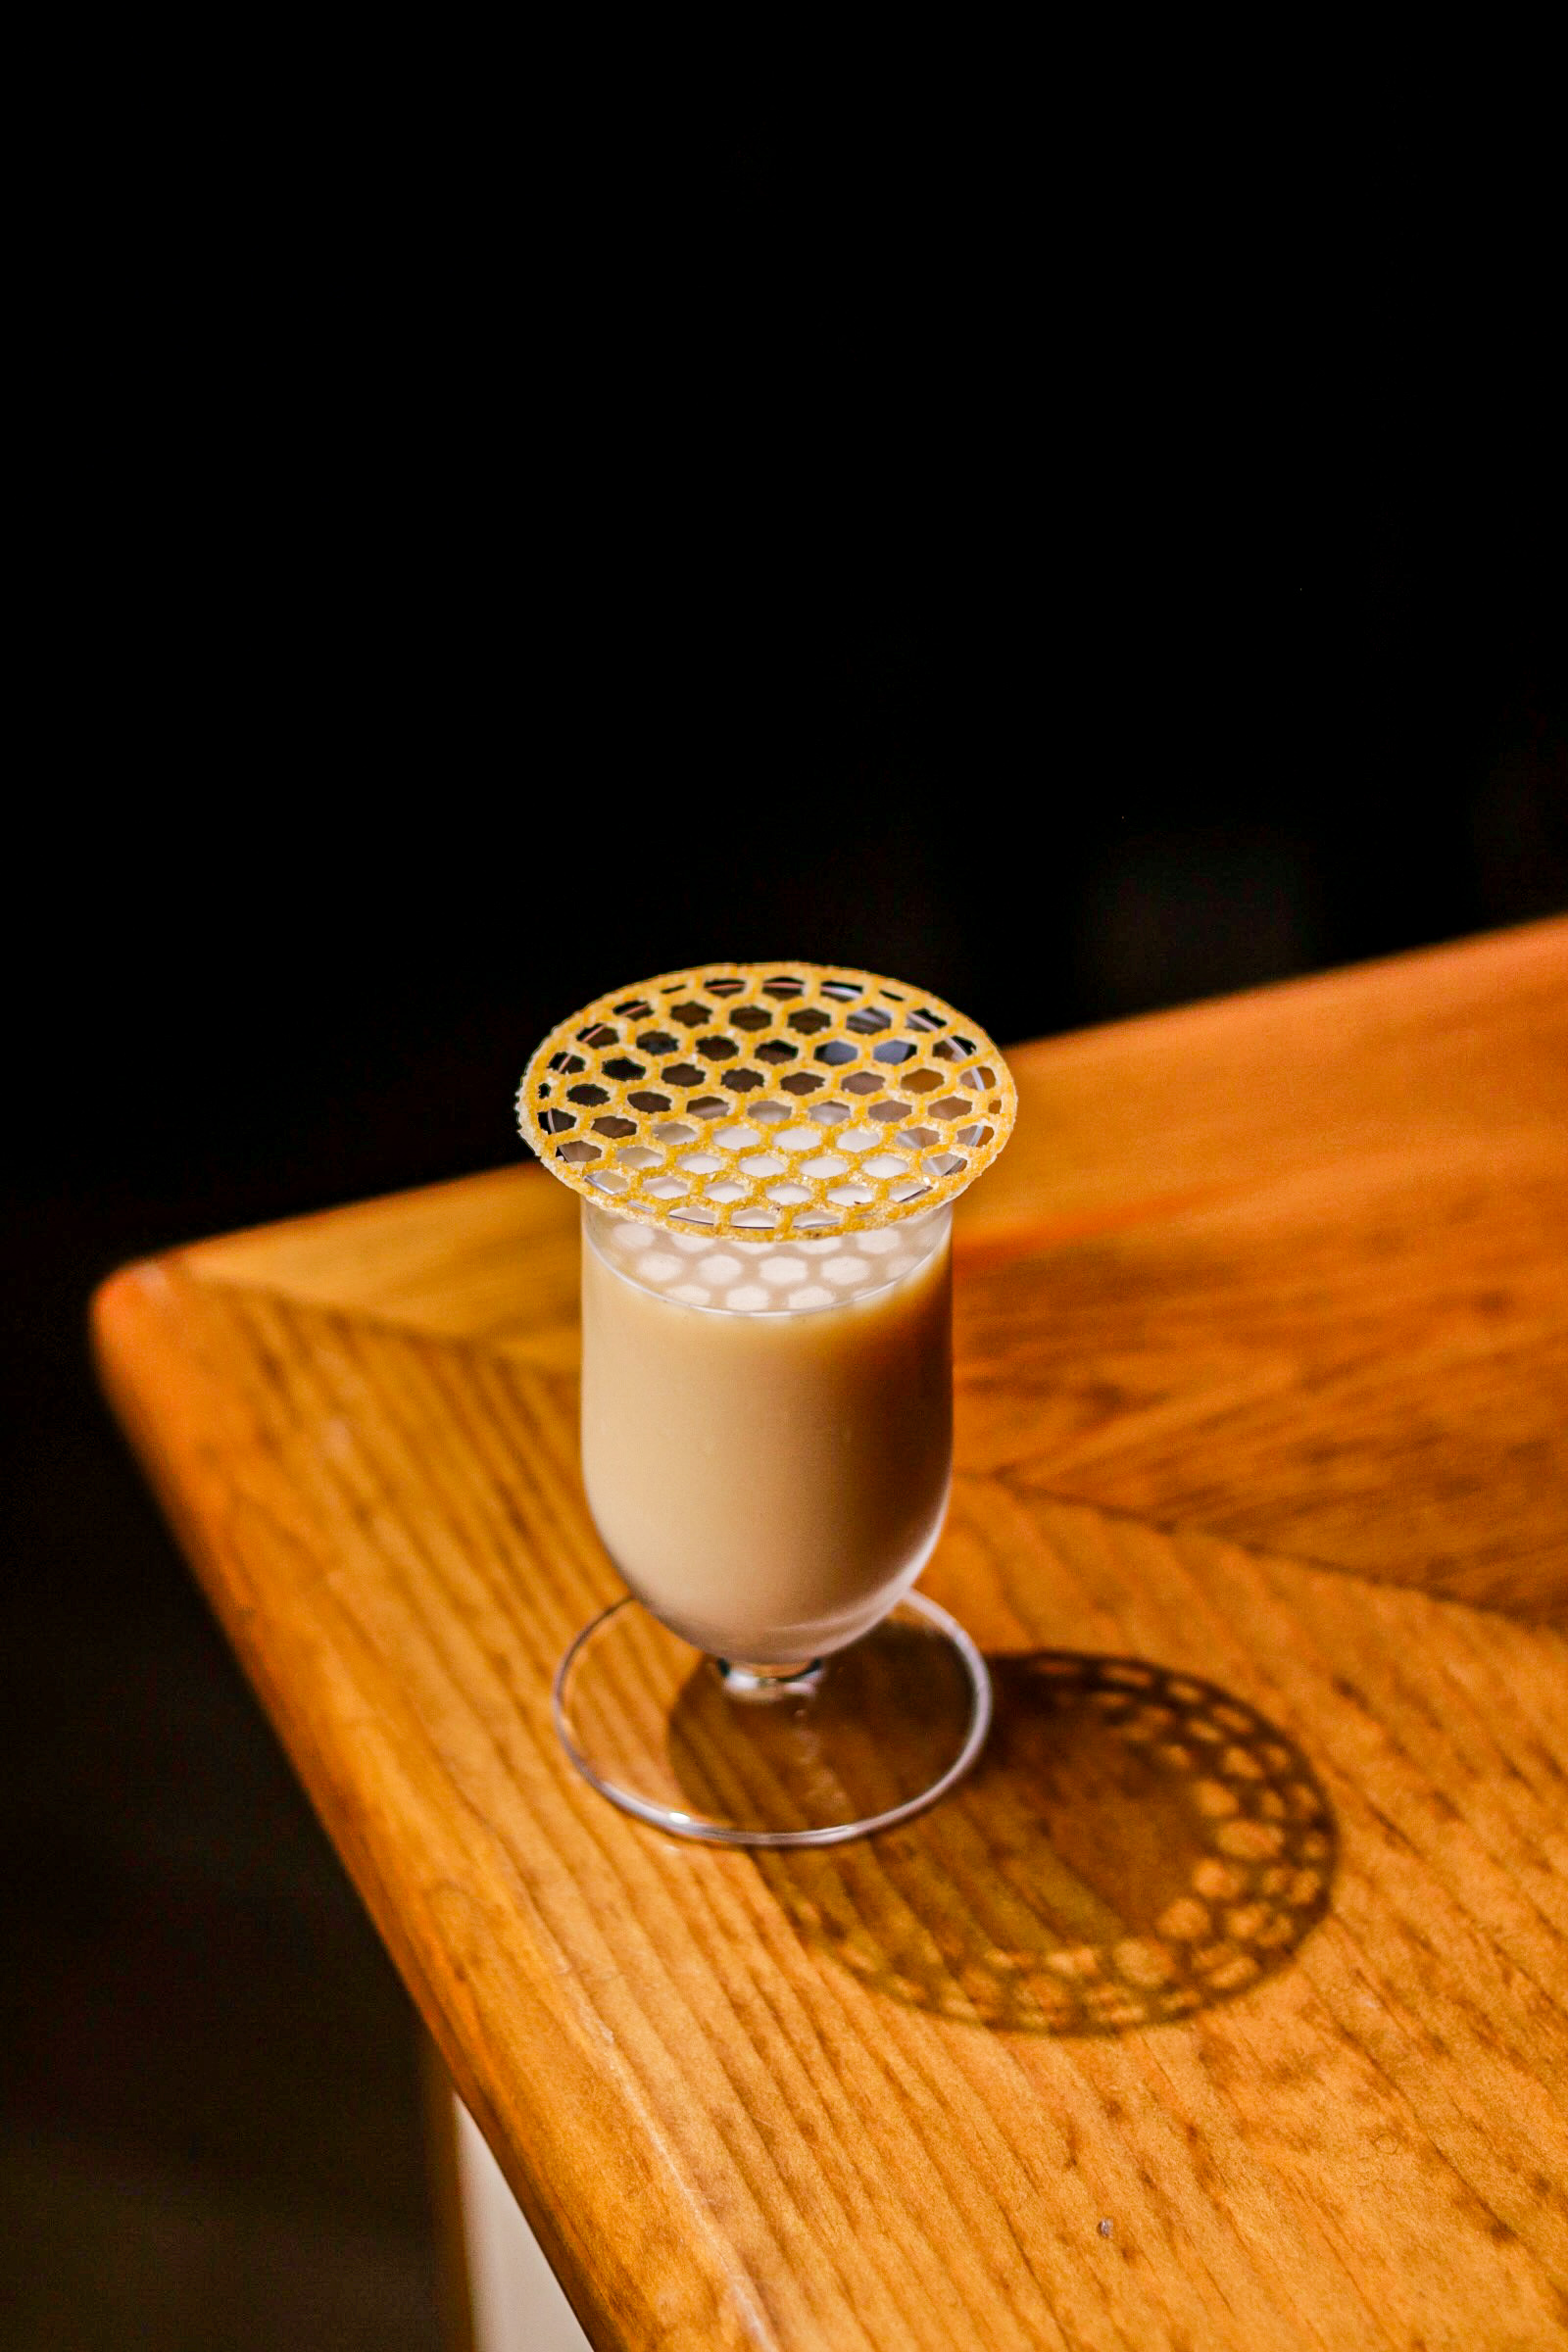 Corn & Silk, a cocktail that's part of the Below Stairs x Stray collab